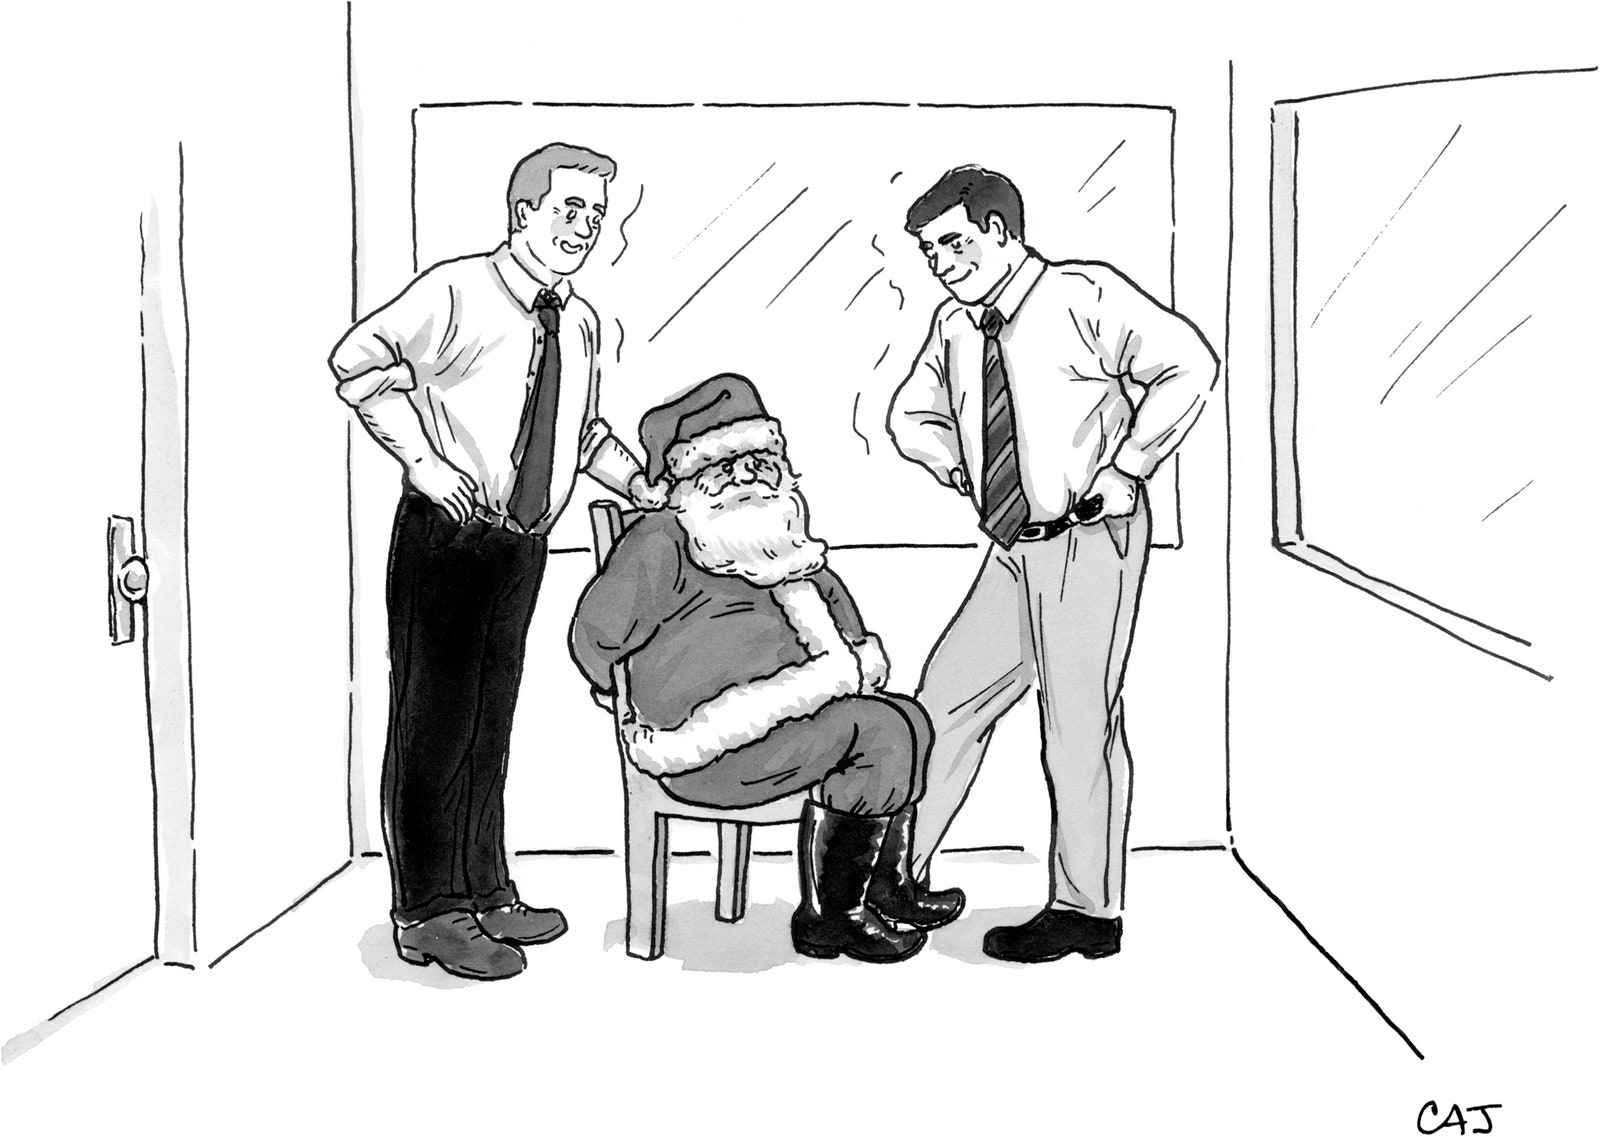 In a room with two mirror windows two police officers interrogate Santa Claus who is tied to chair.